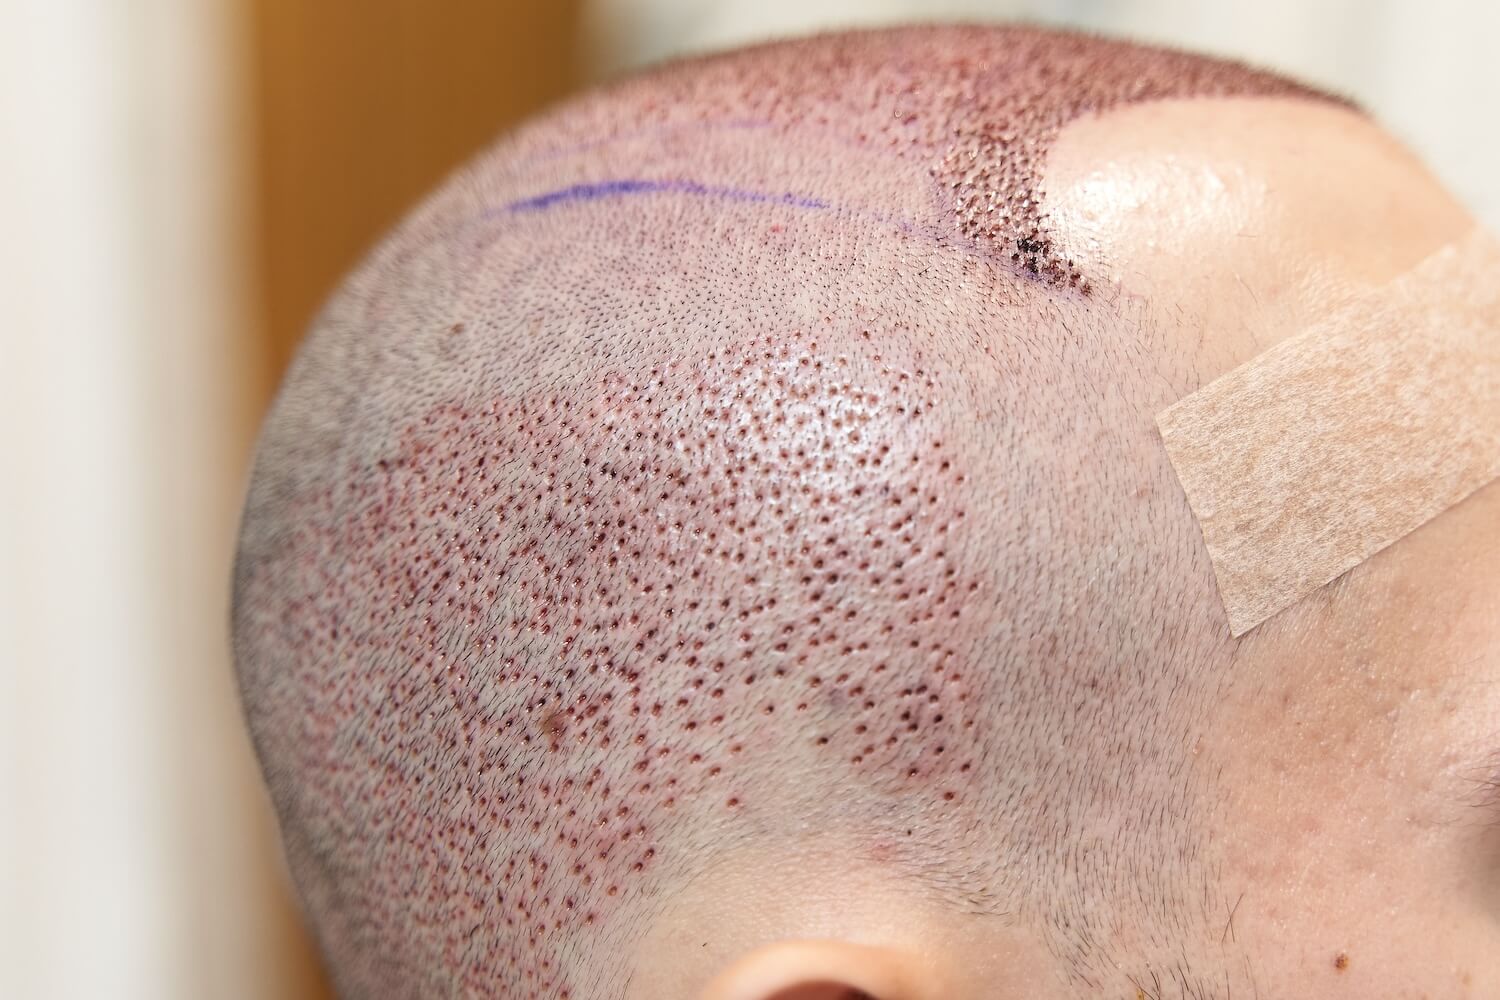 Side view of male scalp after hair transplant surgery